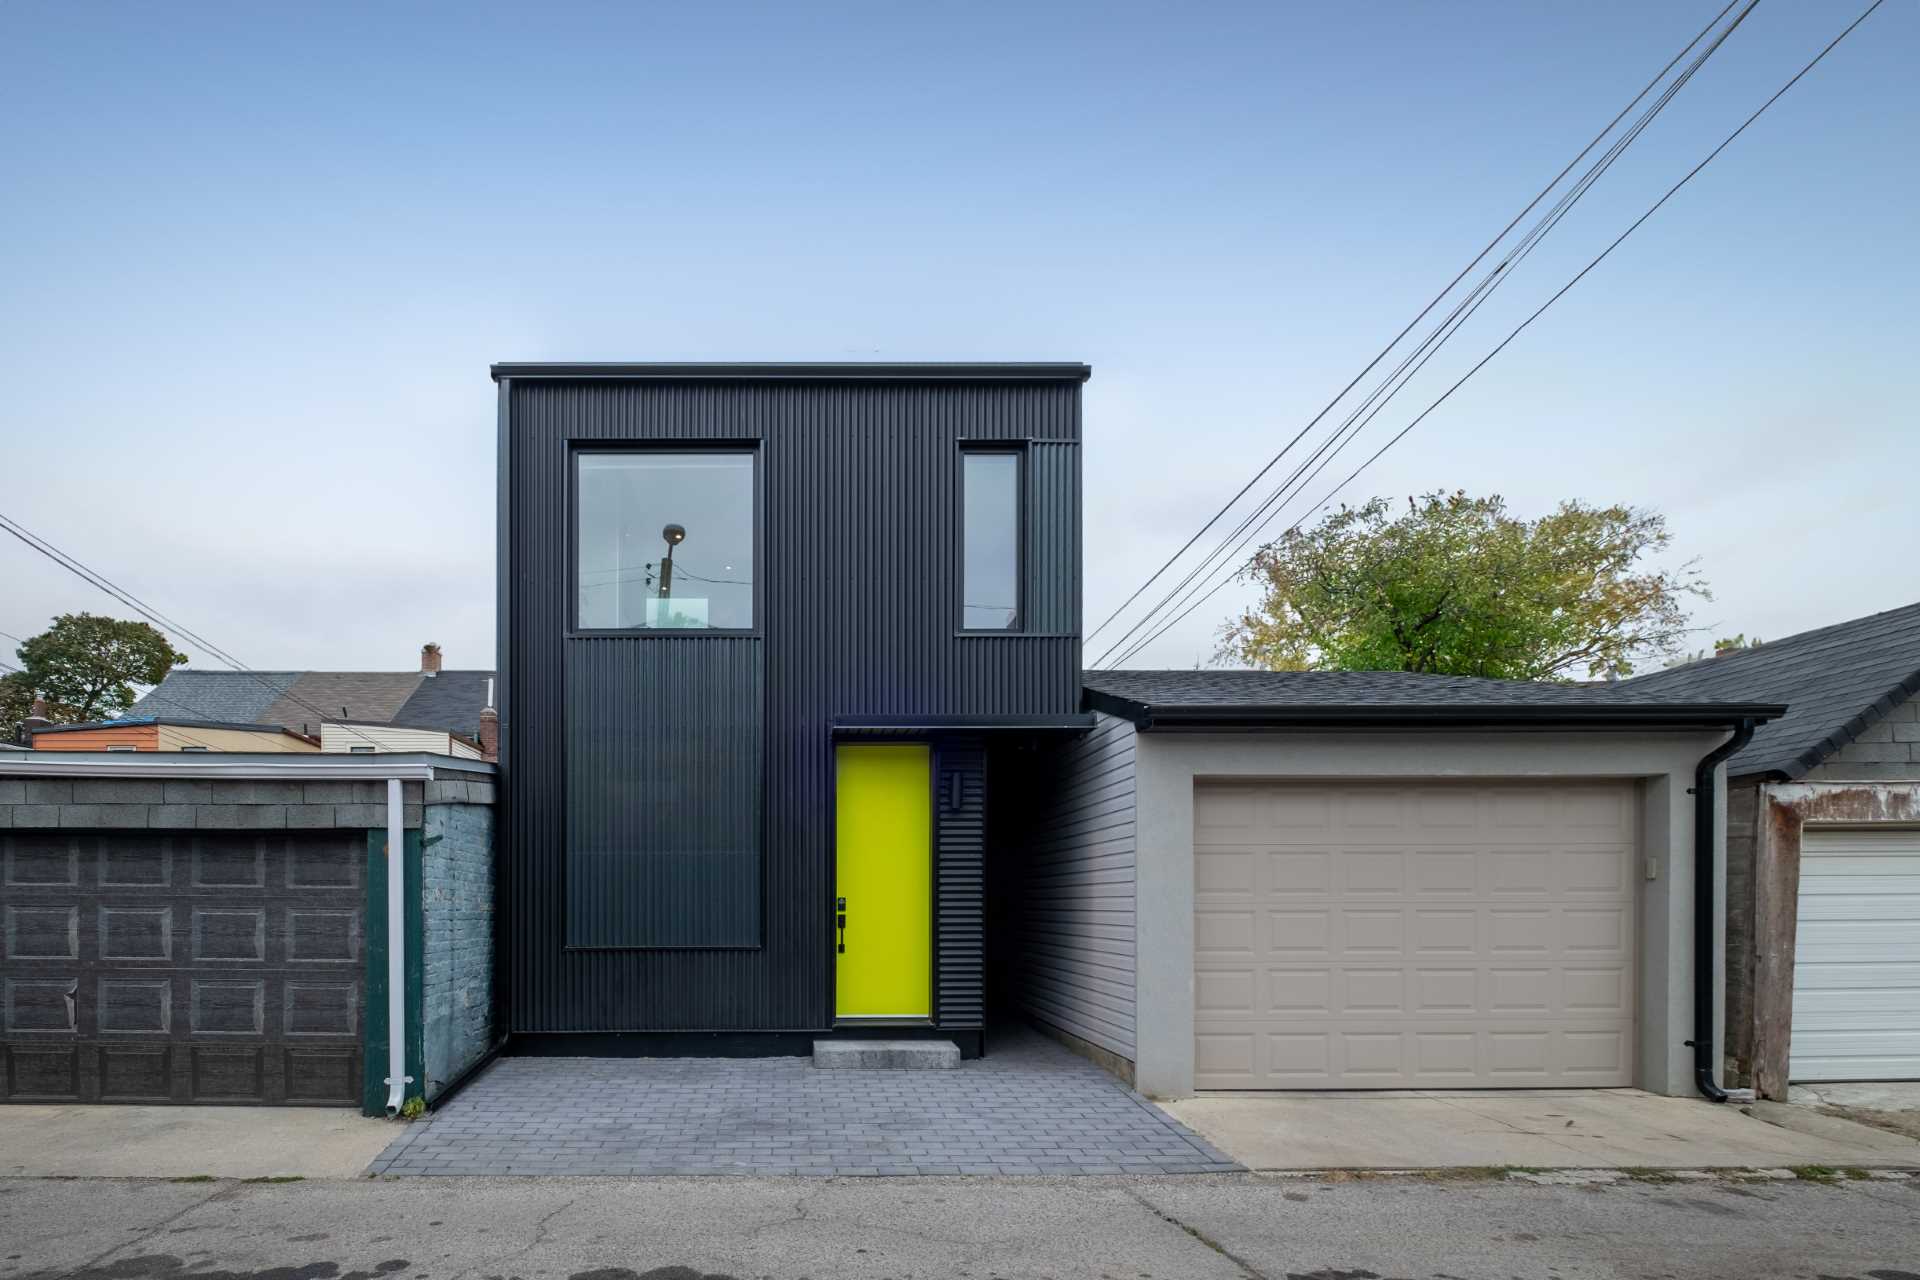 A modern two-storey laneway house with a black exterior and bright yellow door.